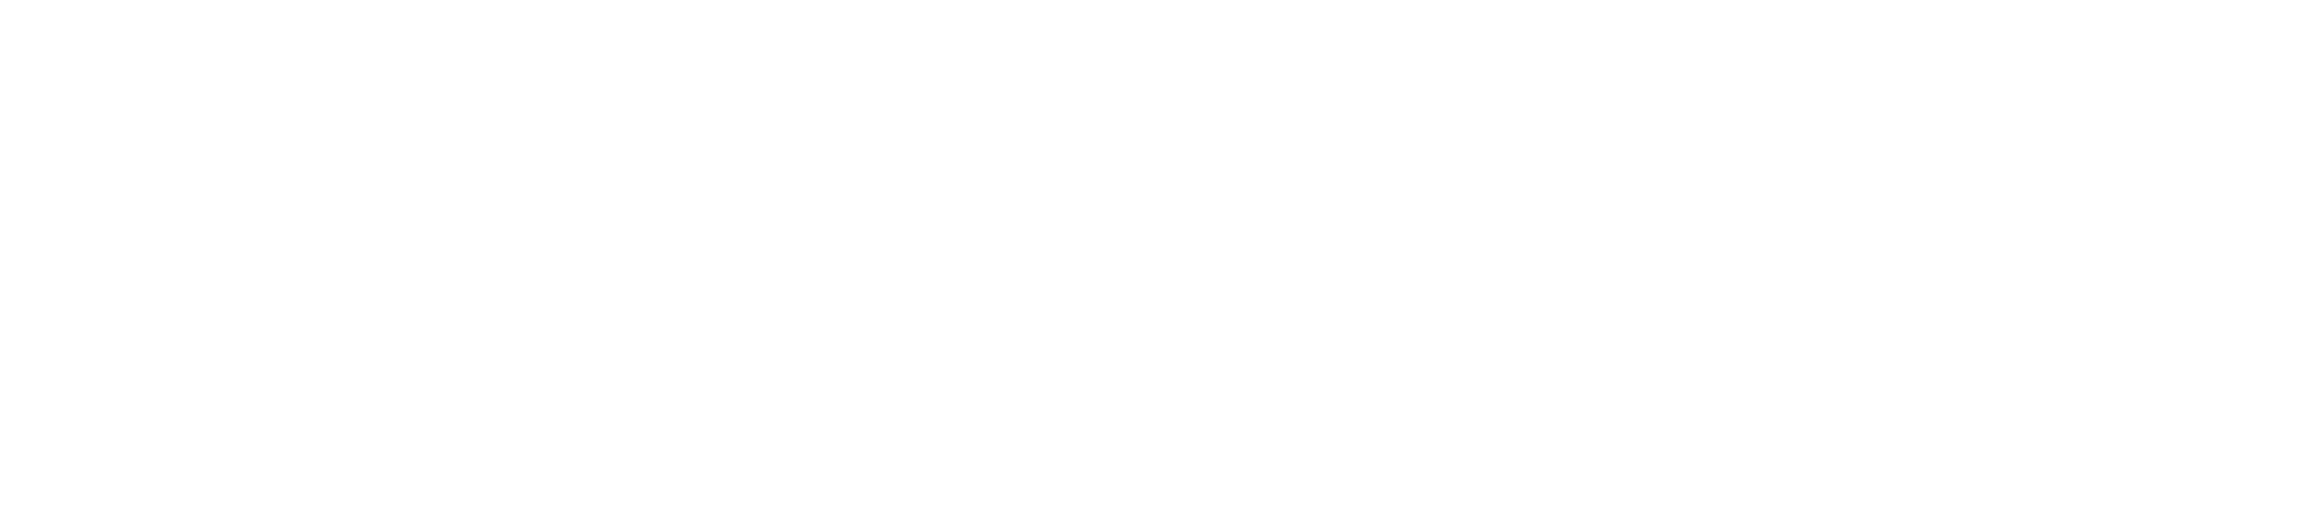 King, Moench & Collins LLP